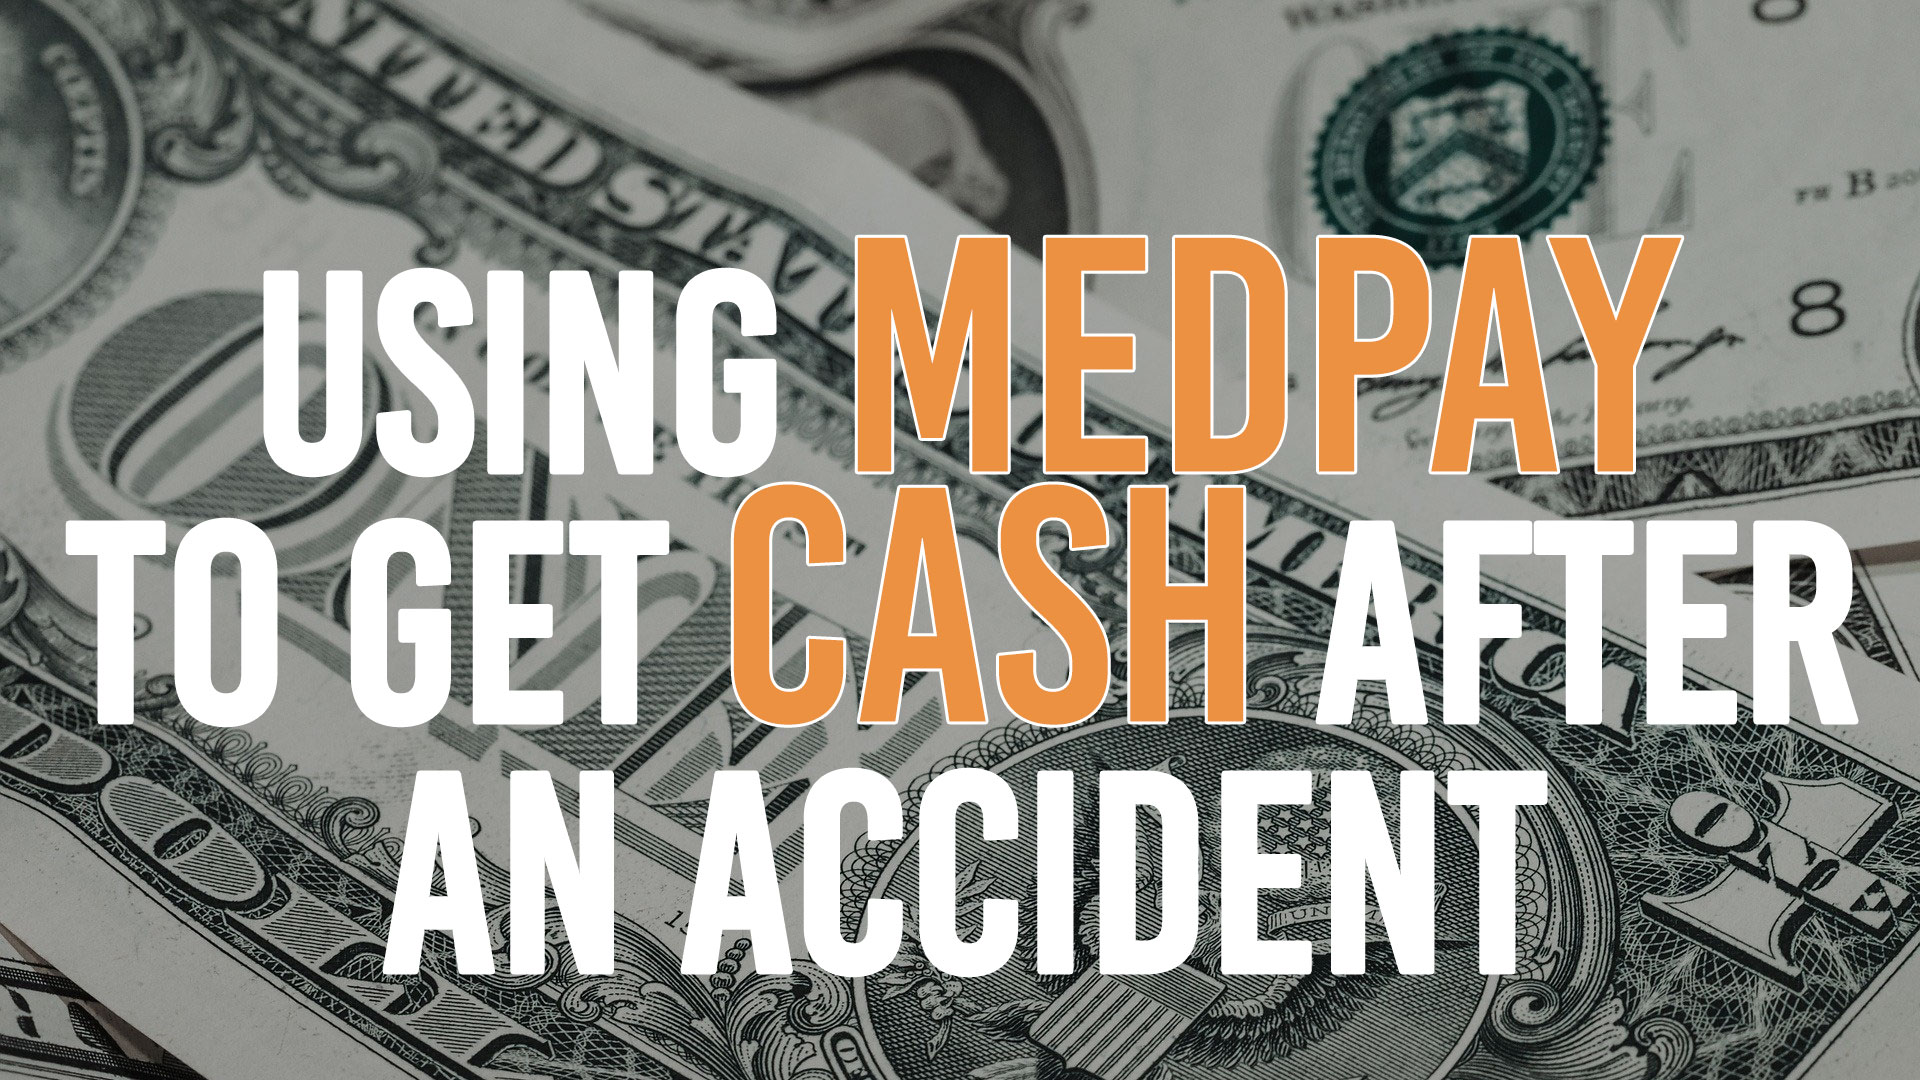 Hacking The System: Using Medpay For CASH After A Wreck.